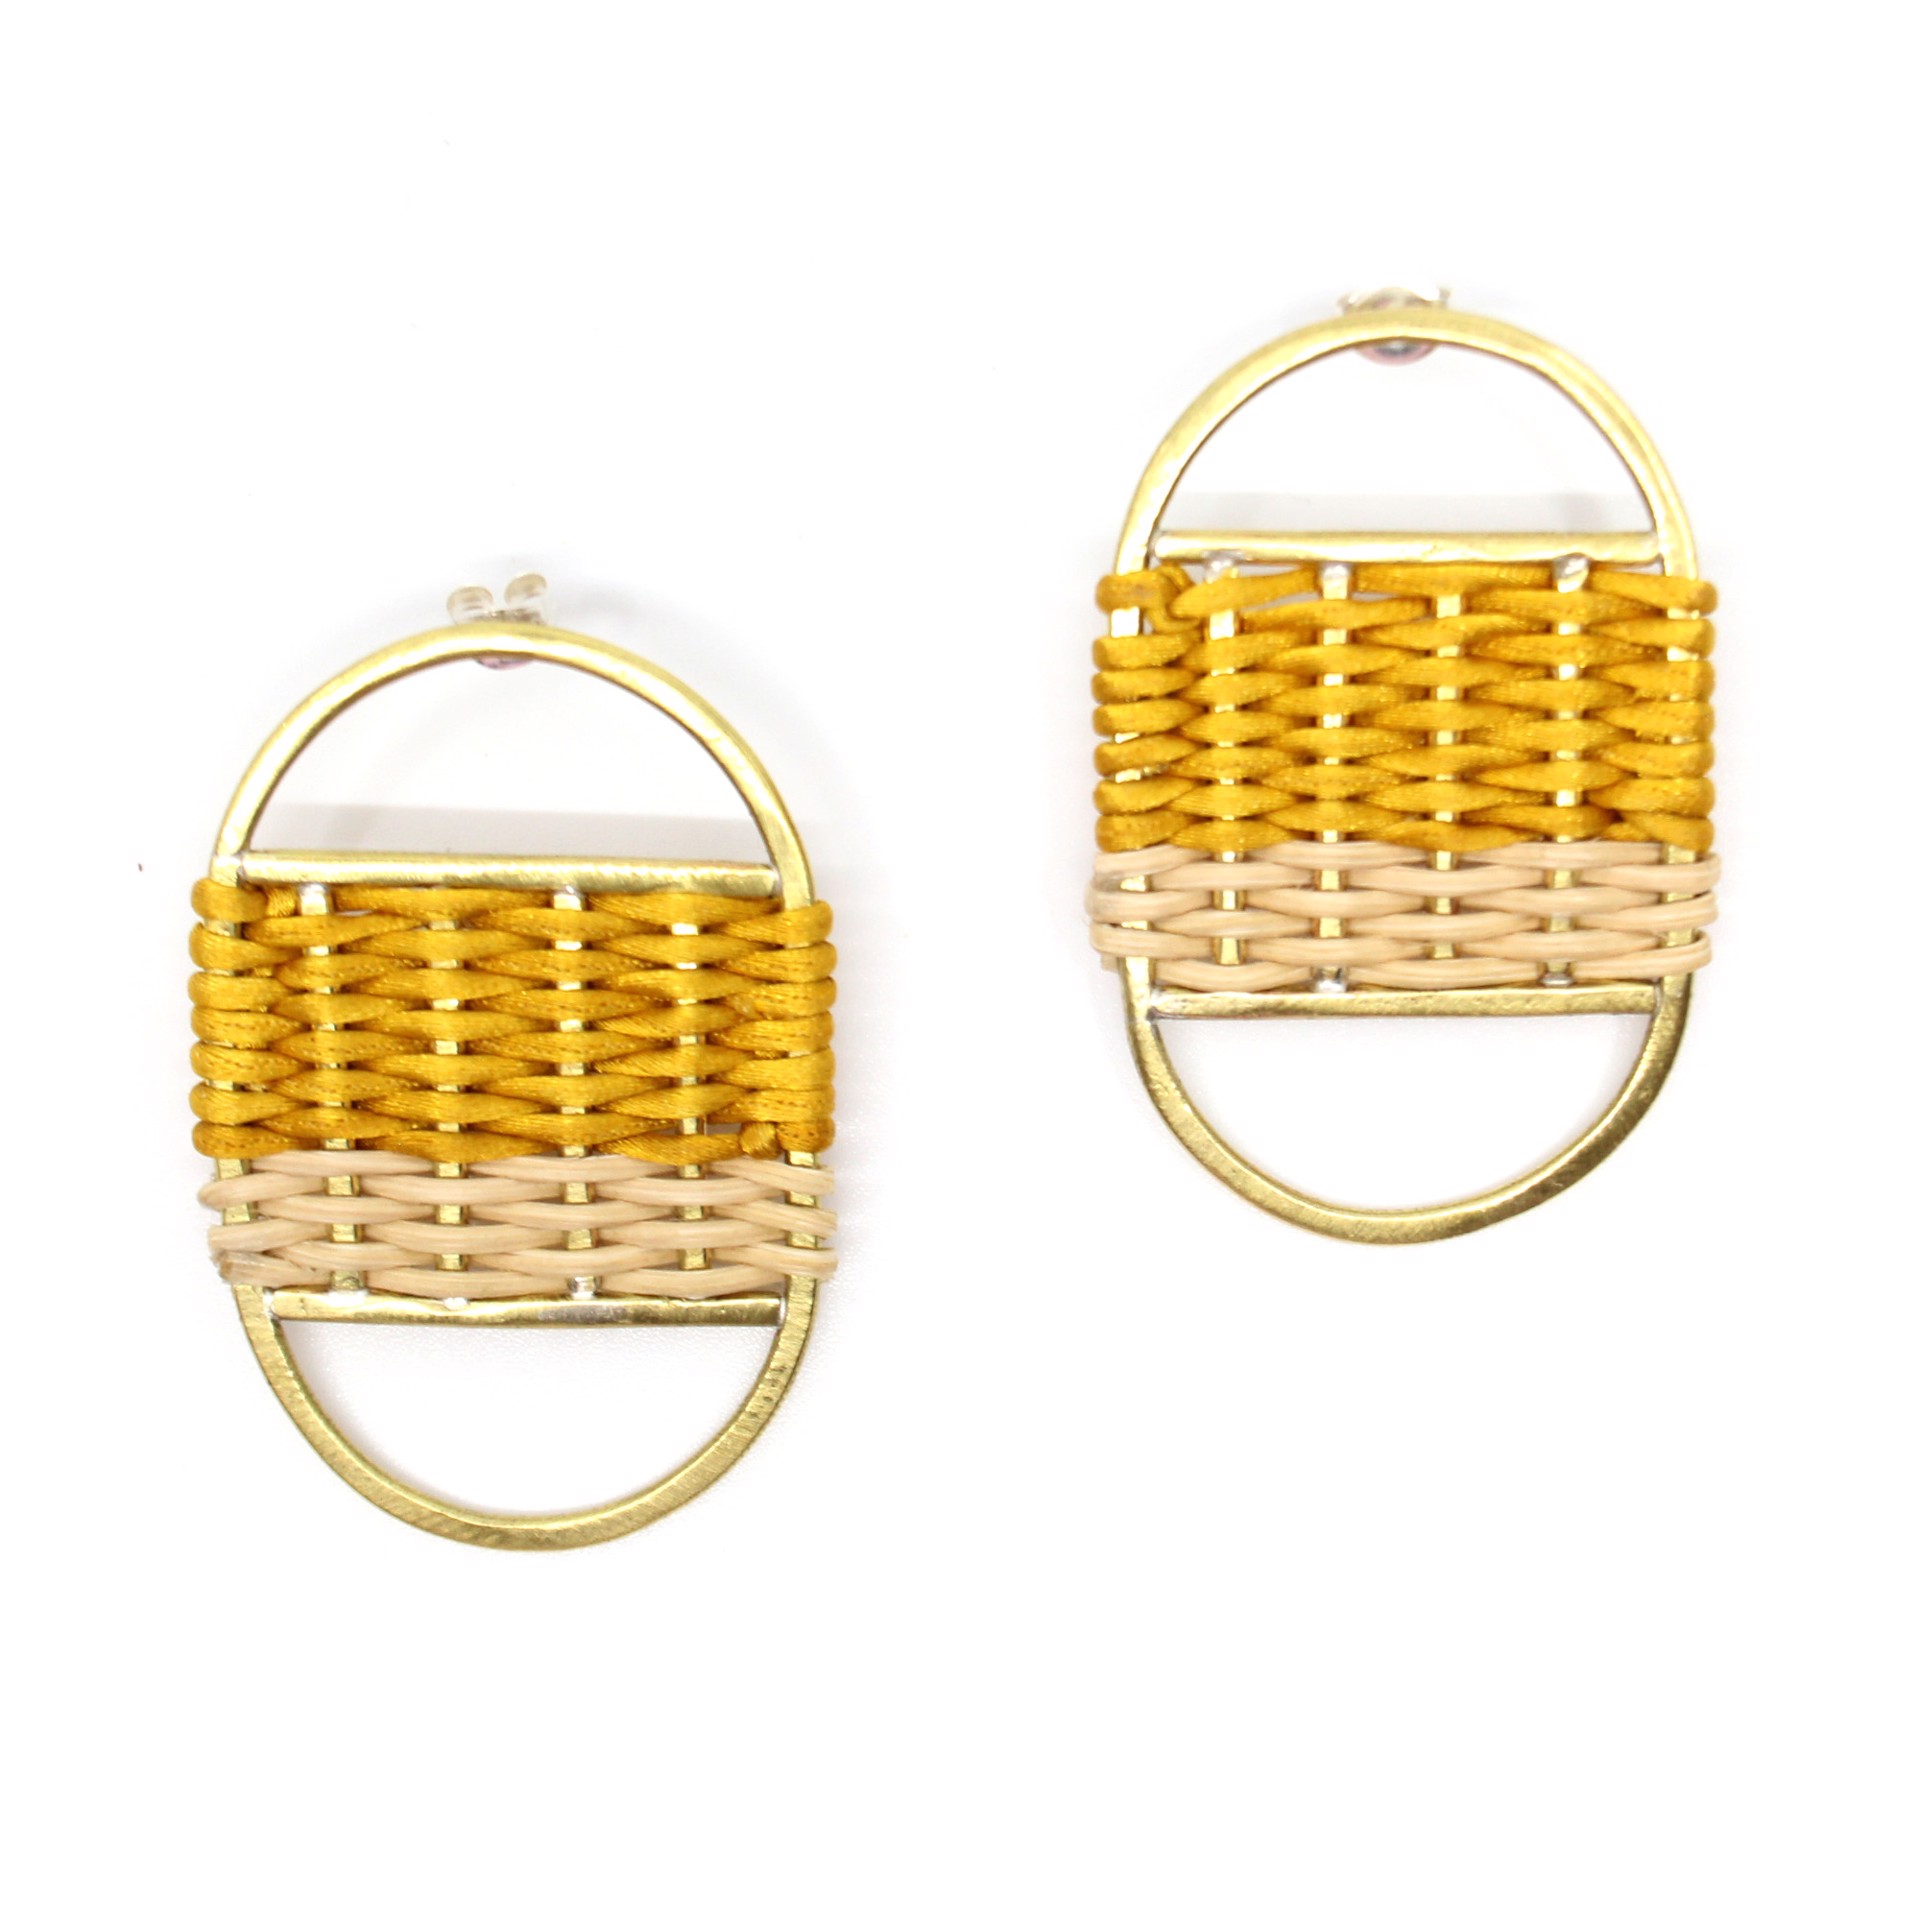 Sunset studs (gold + reed) by Flag Mountain Jewelry